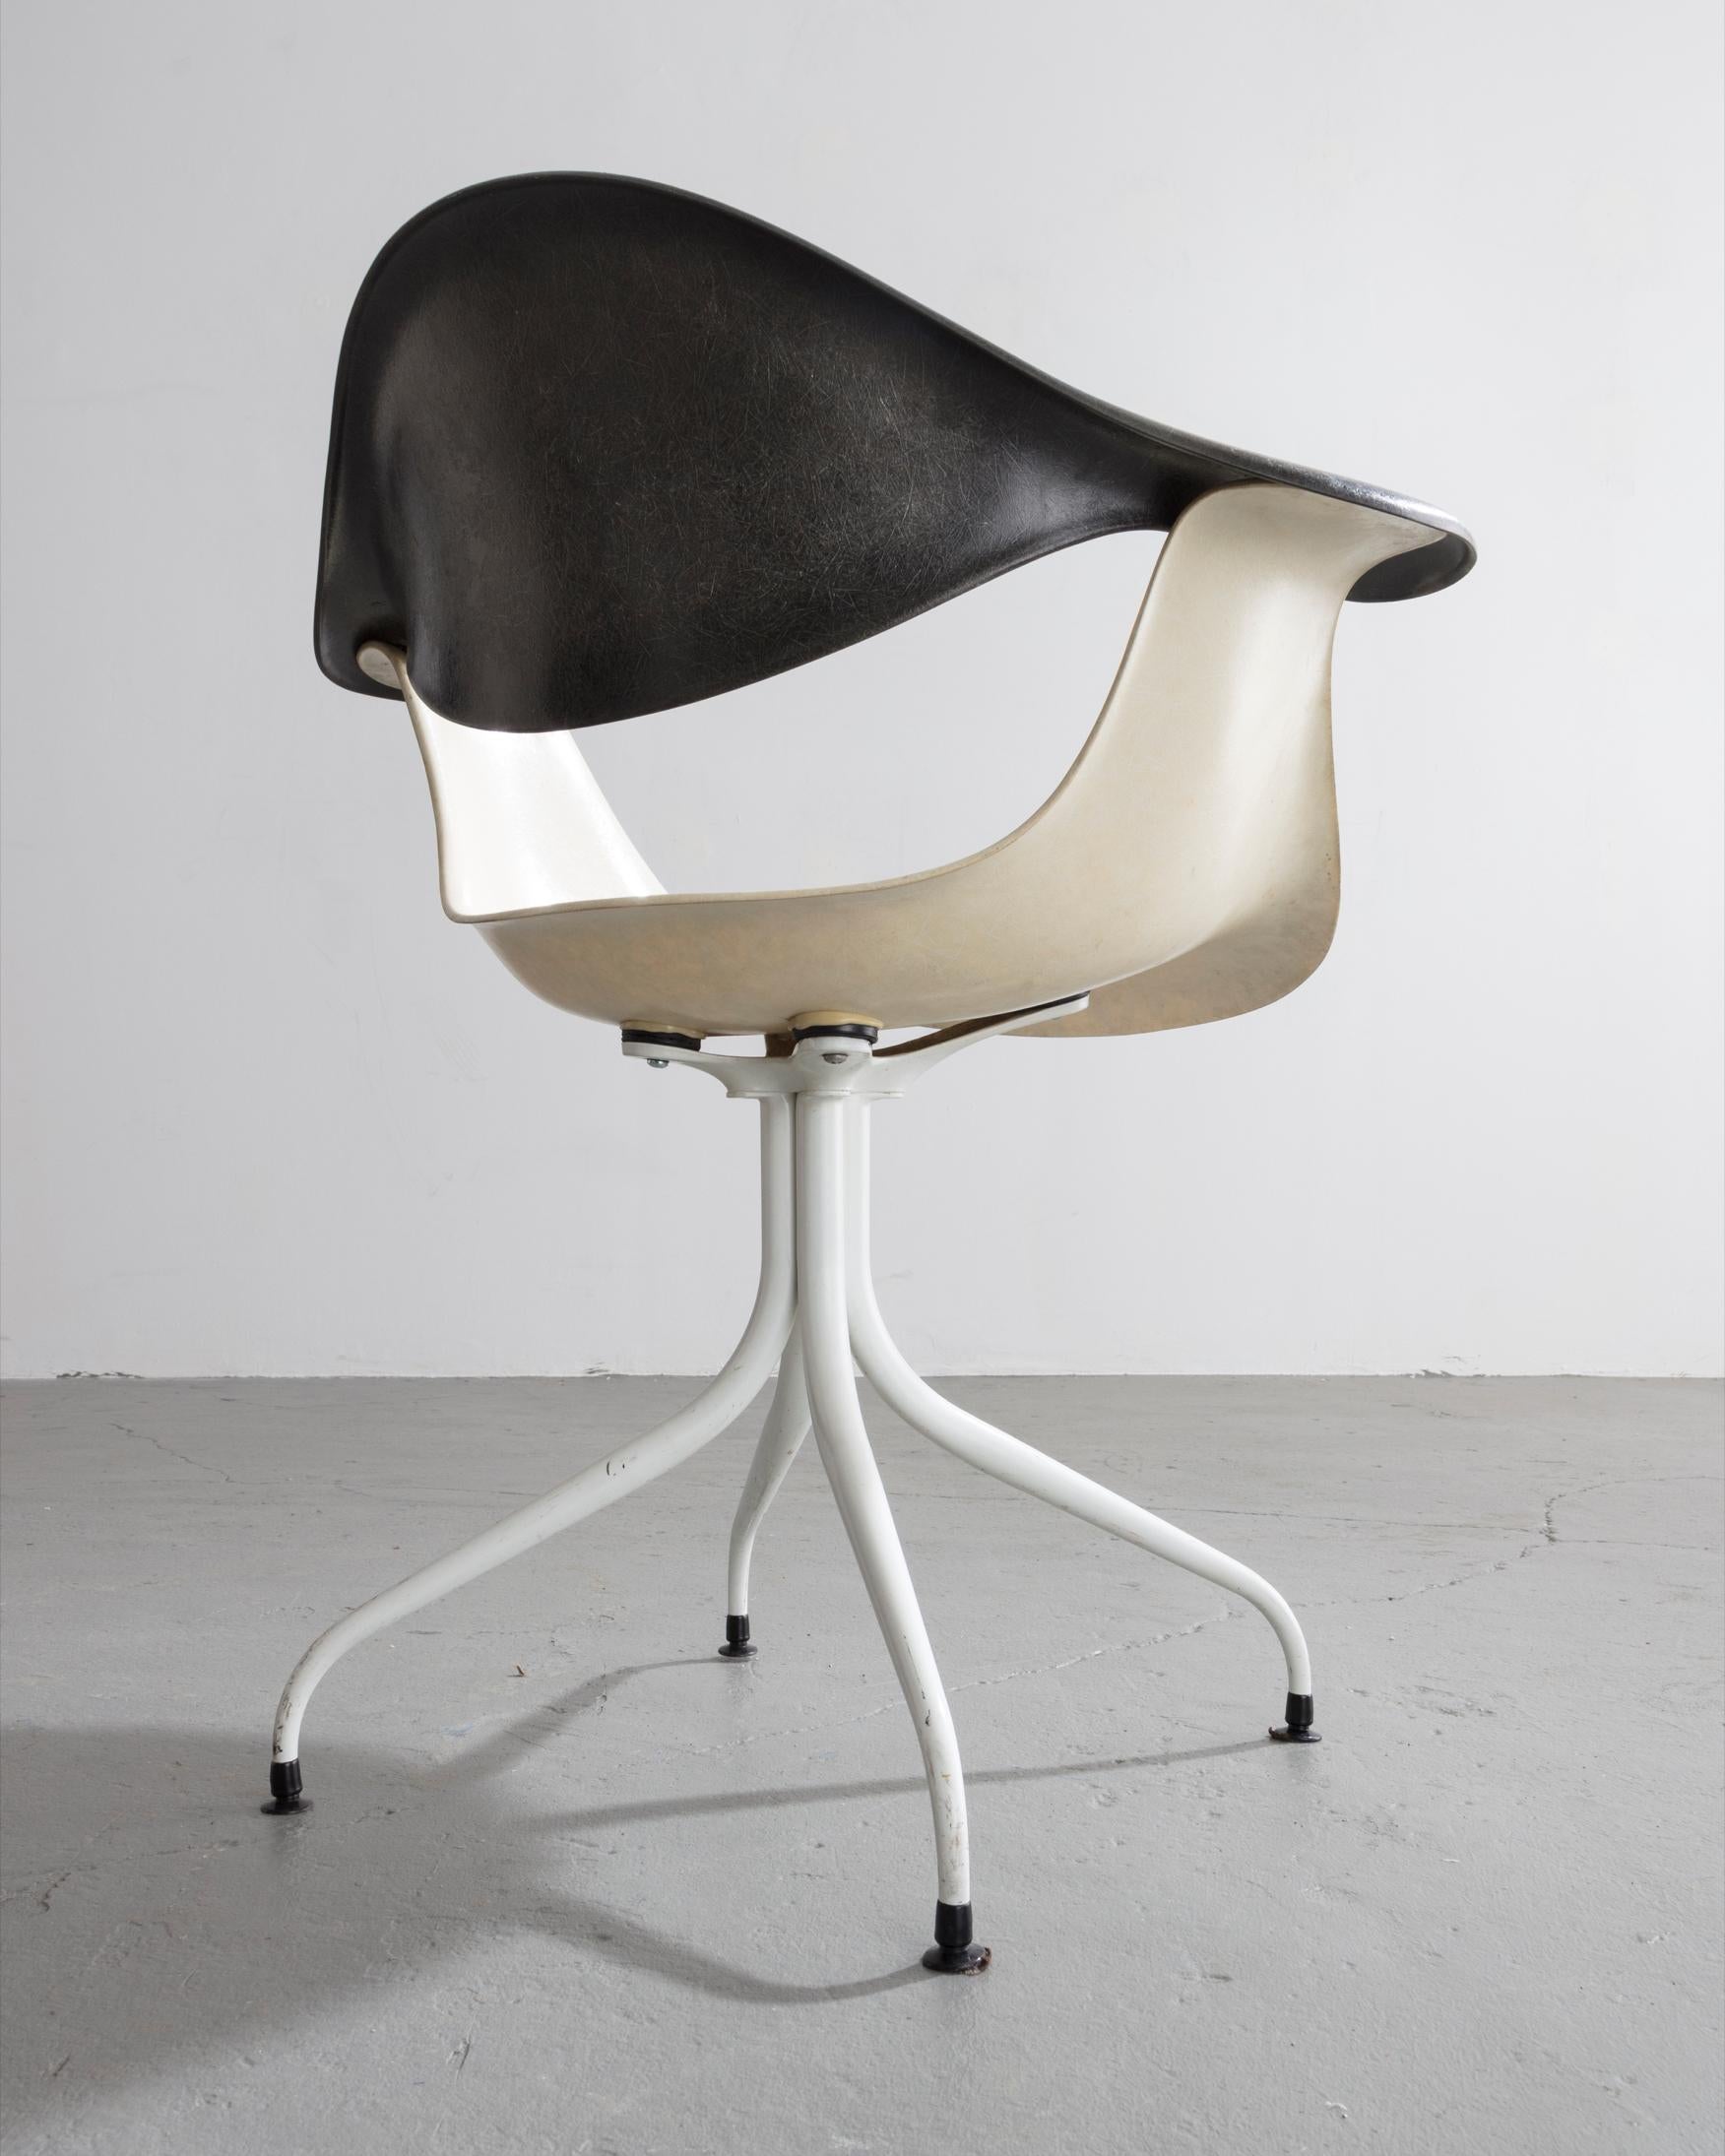 American Swaged Leg Chair in Gray and White by Georg Nelson & Associates, 1954